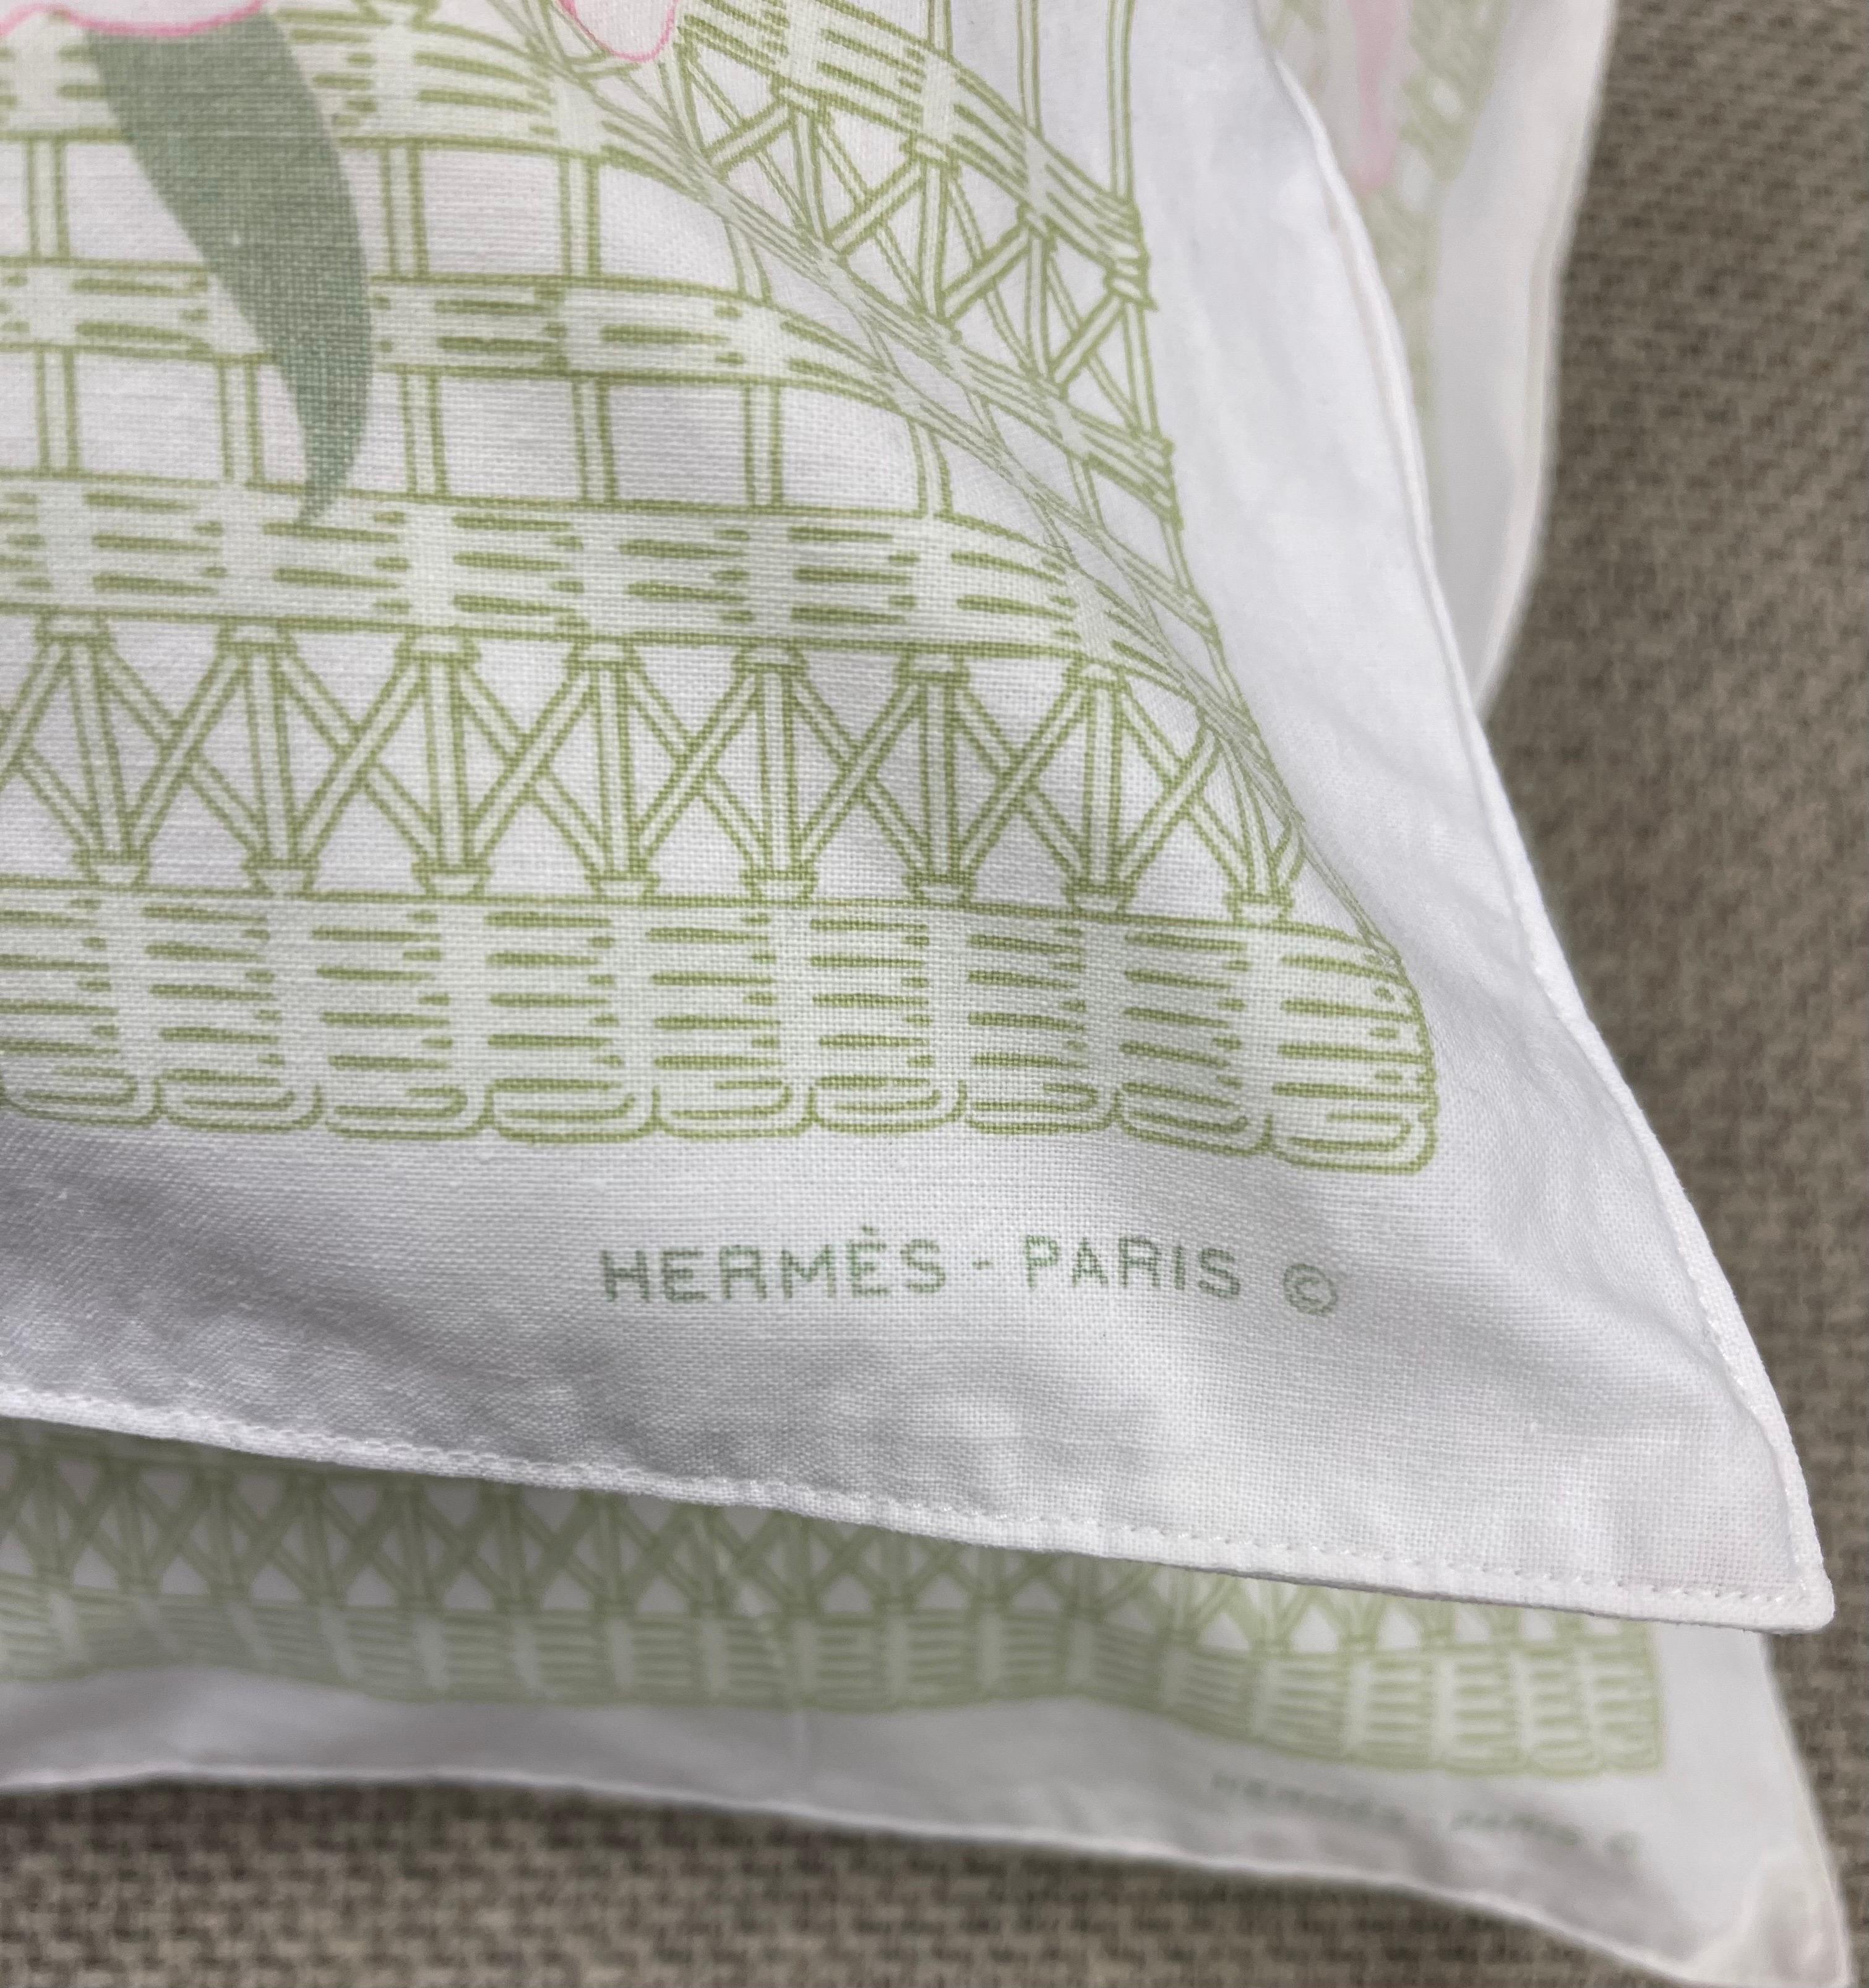 20th Century Pair of Matching Vintage Hermes Throw Pillows